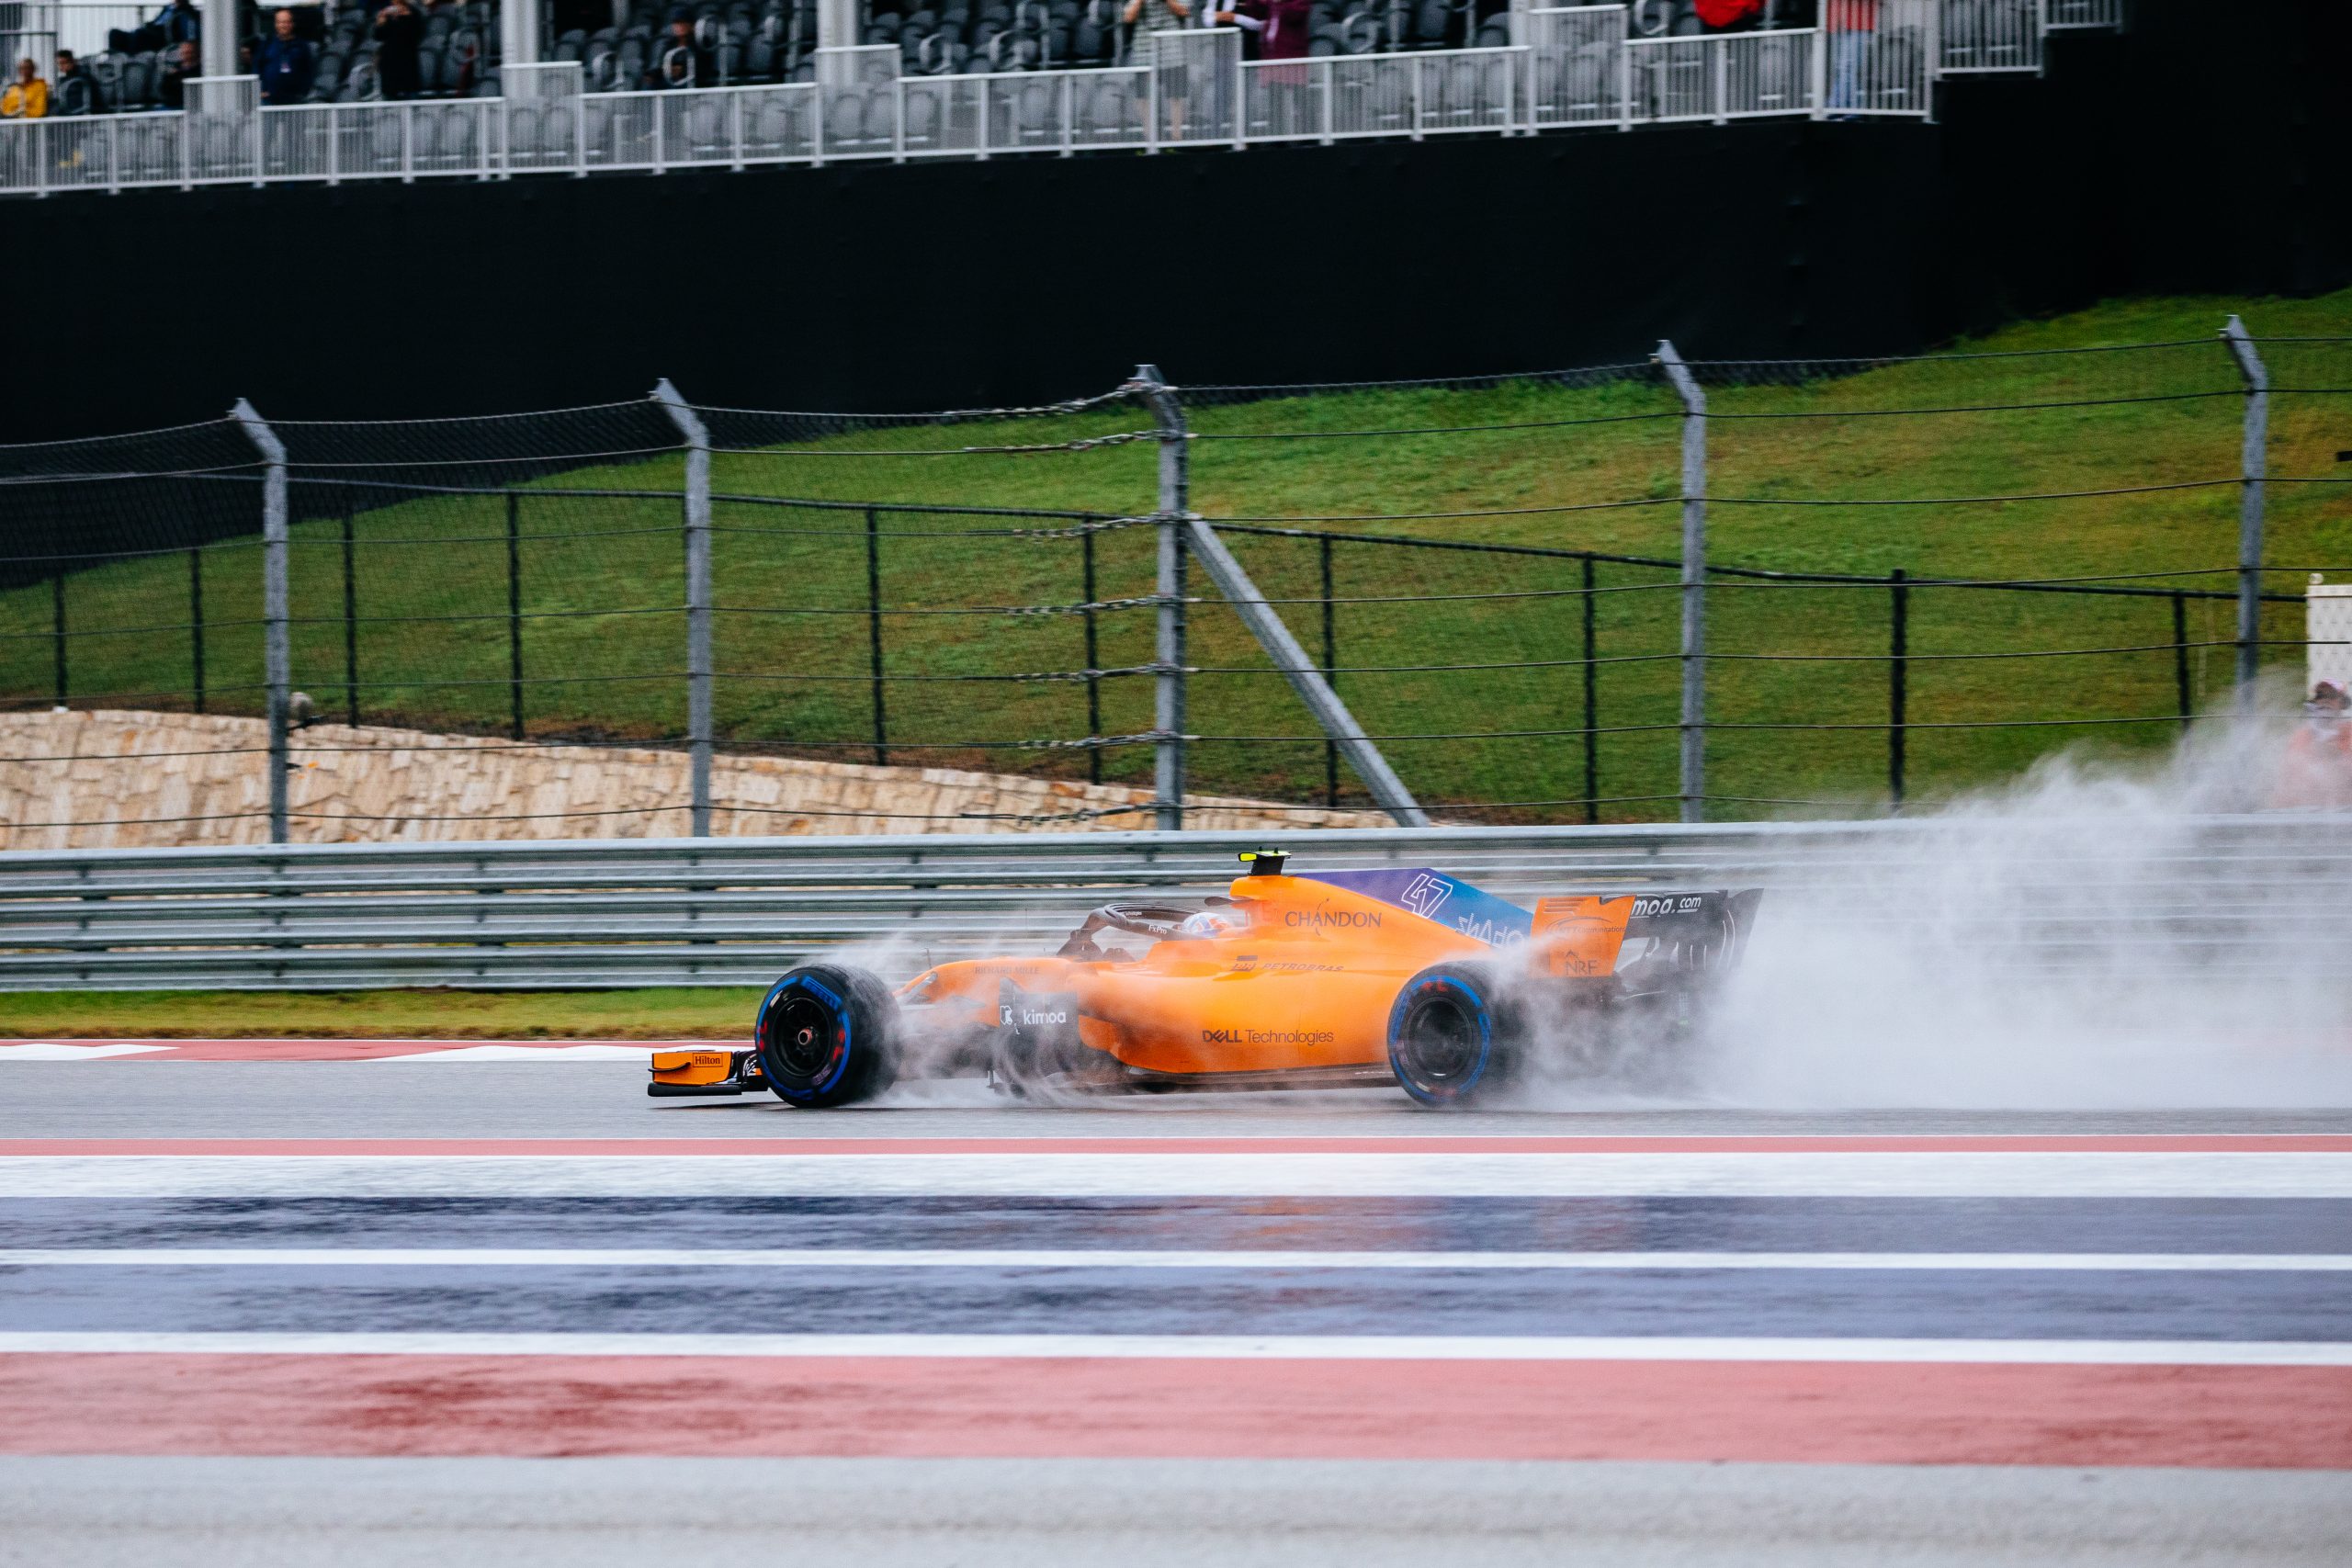 Driver Lando Norris putting his McLaren through the paces in a very wet FP1 session. Lando will be driving full-time for McLaren for the 2019 season.